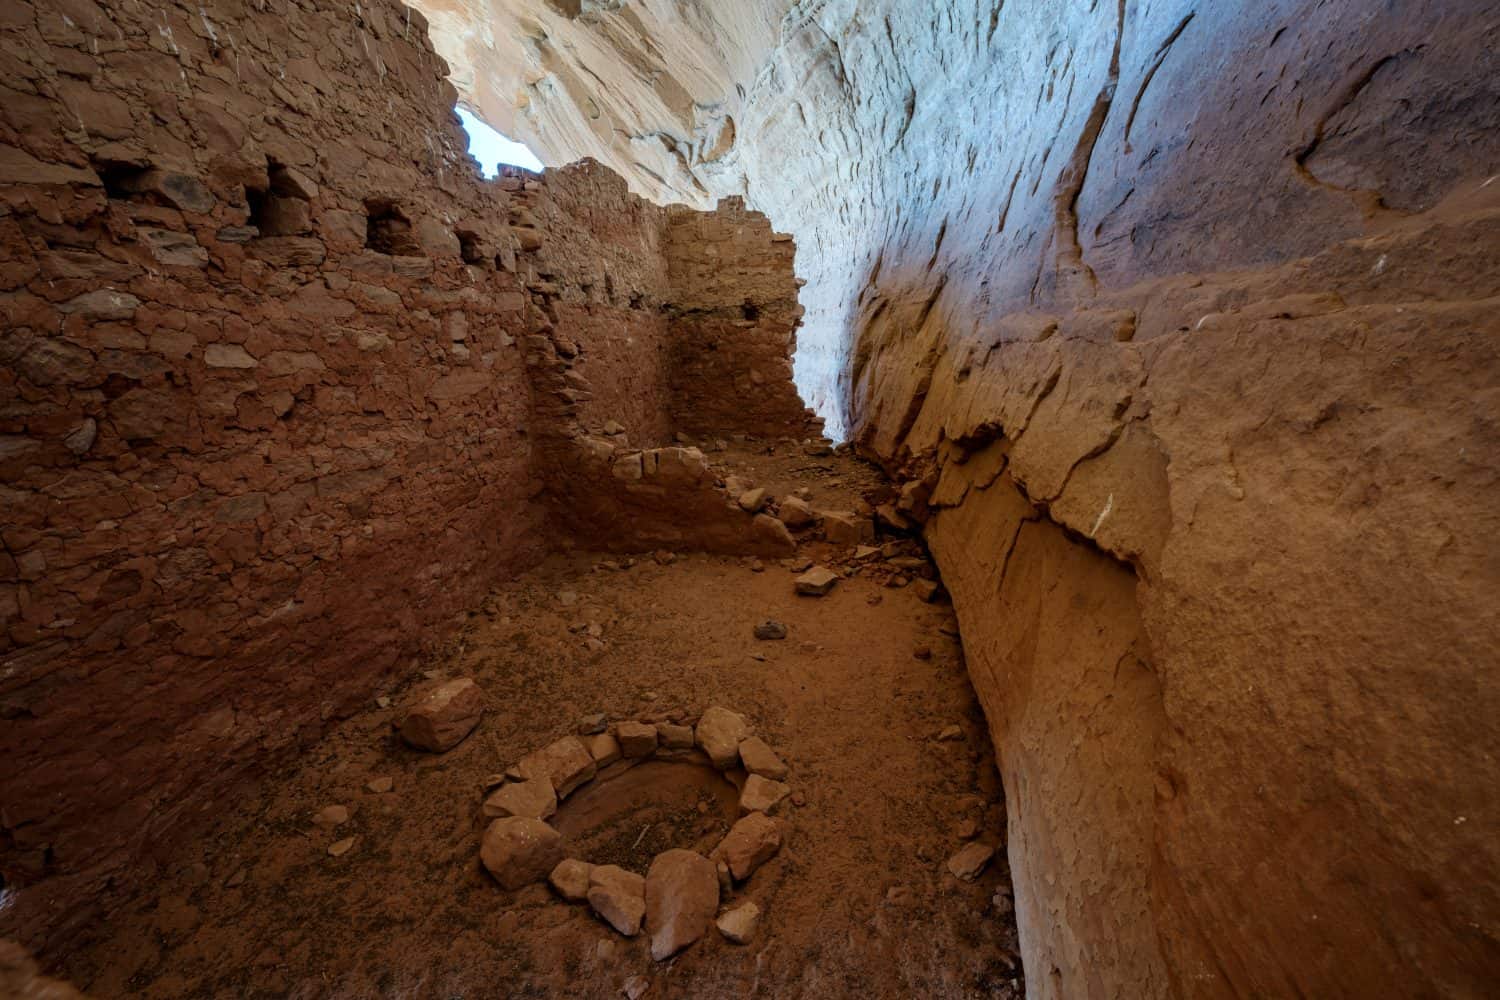 The 17 Room Ruin, located on the Navajo Reservation near the San Juan River.